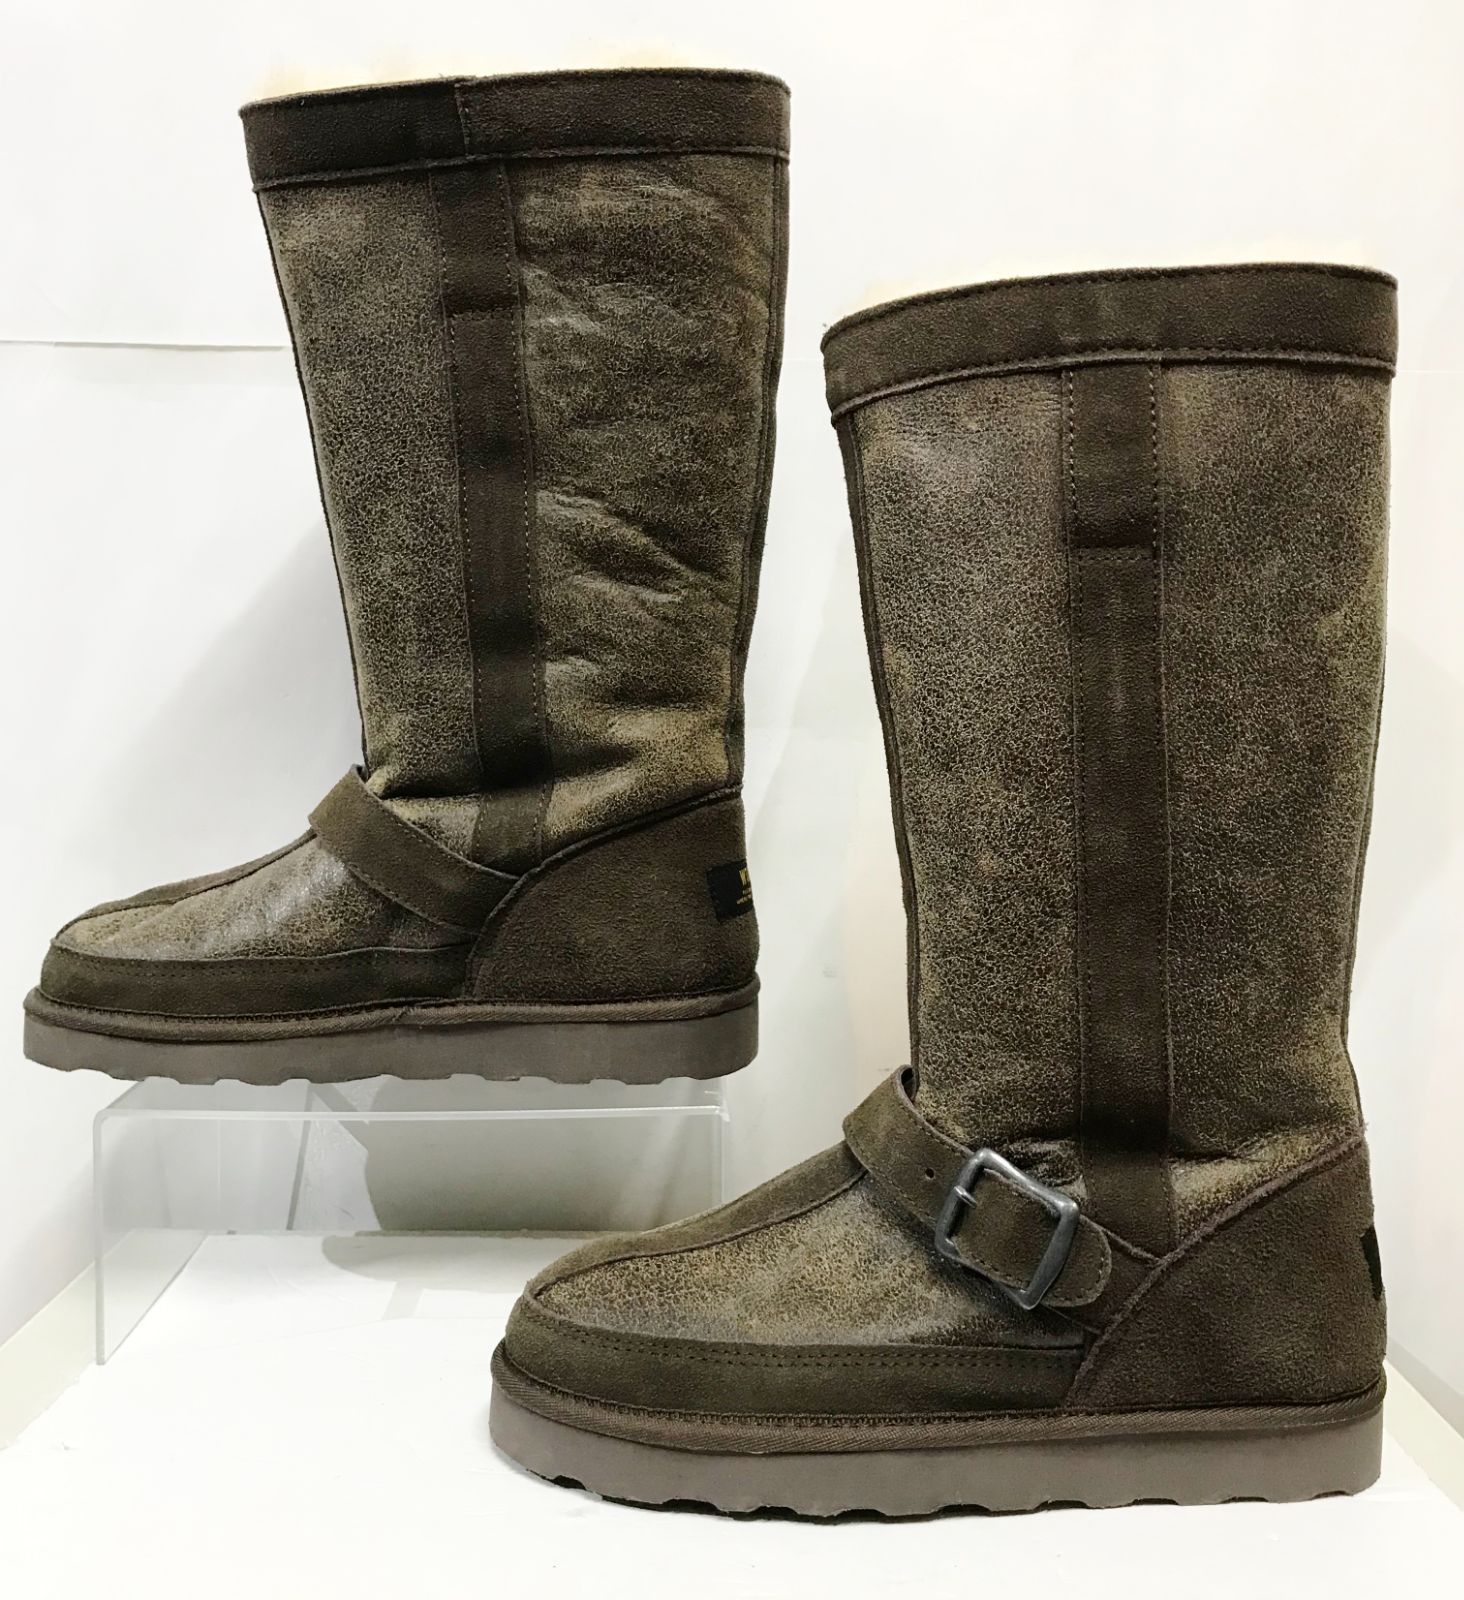 WTAPS A-6 BOOTS LEATHER SHEEP SKIN